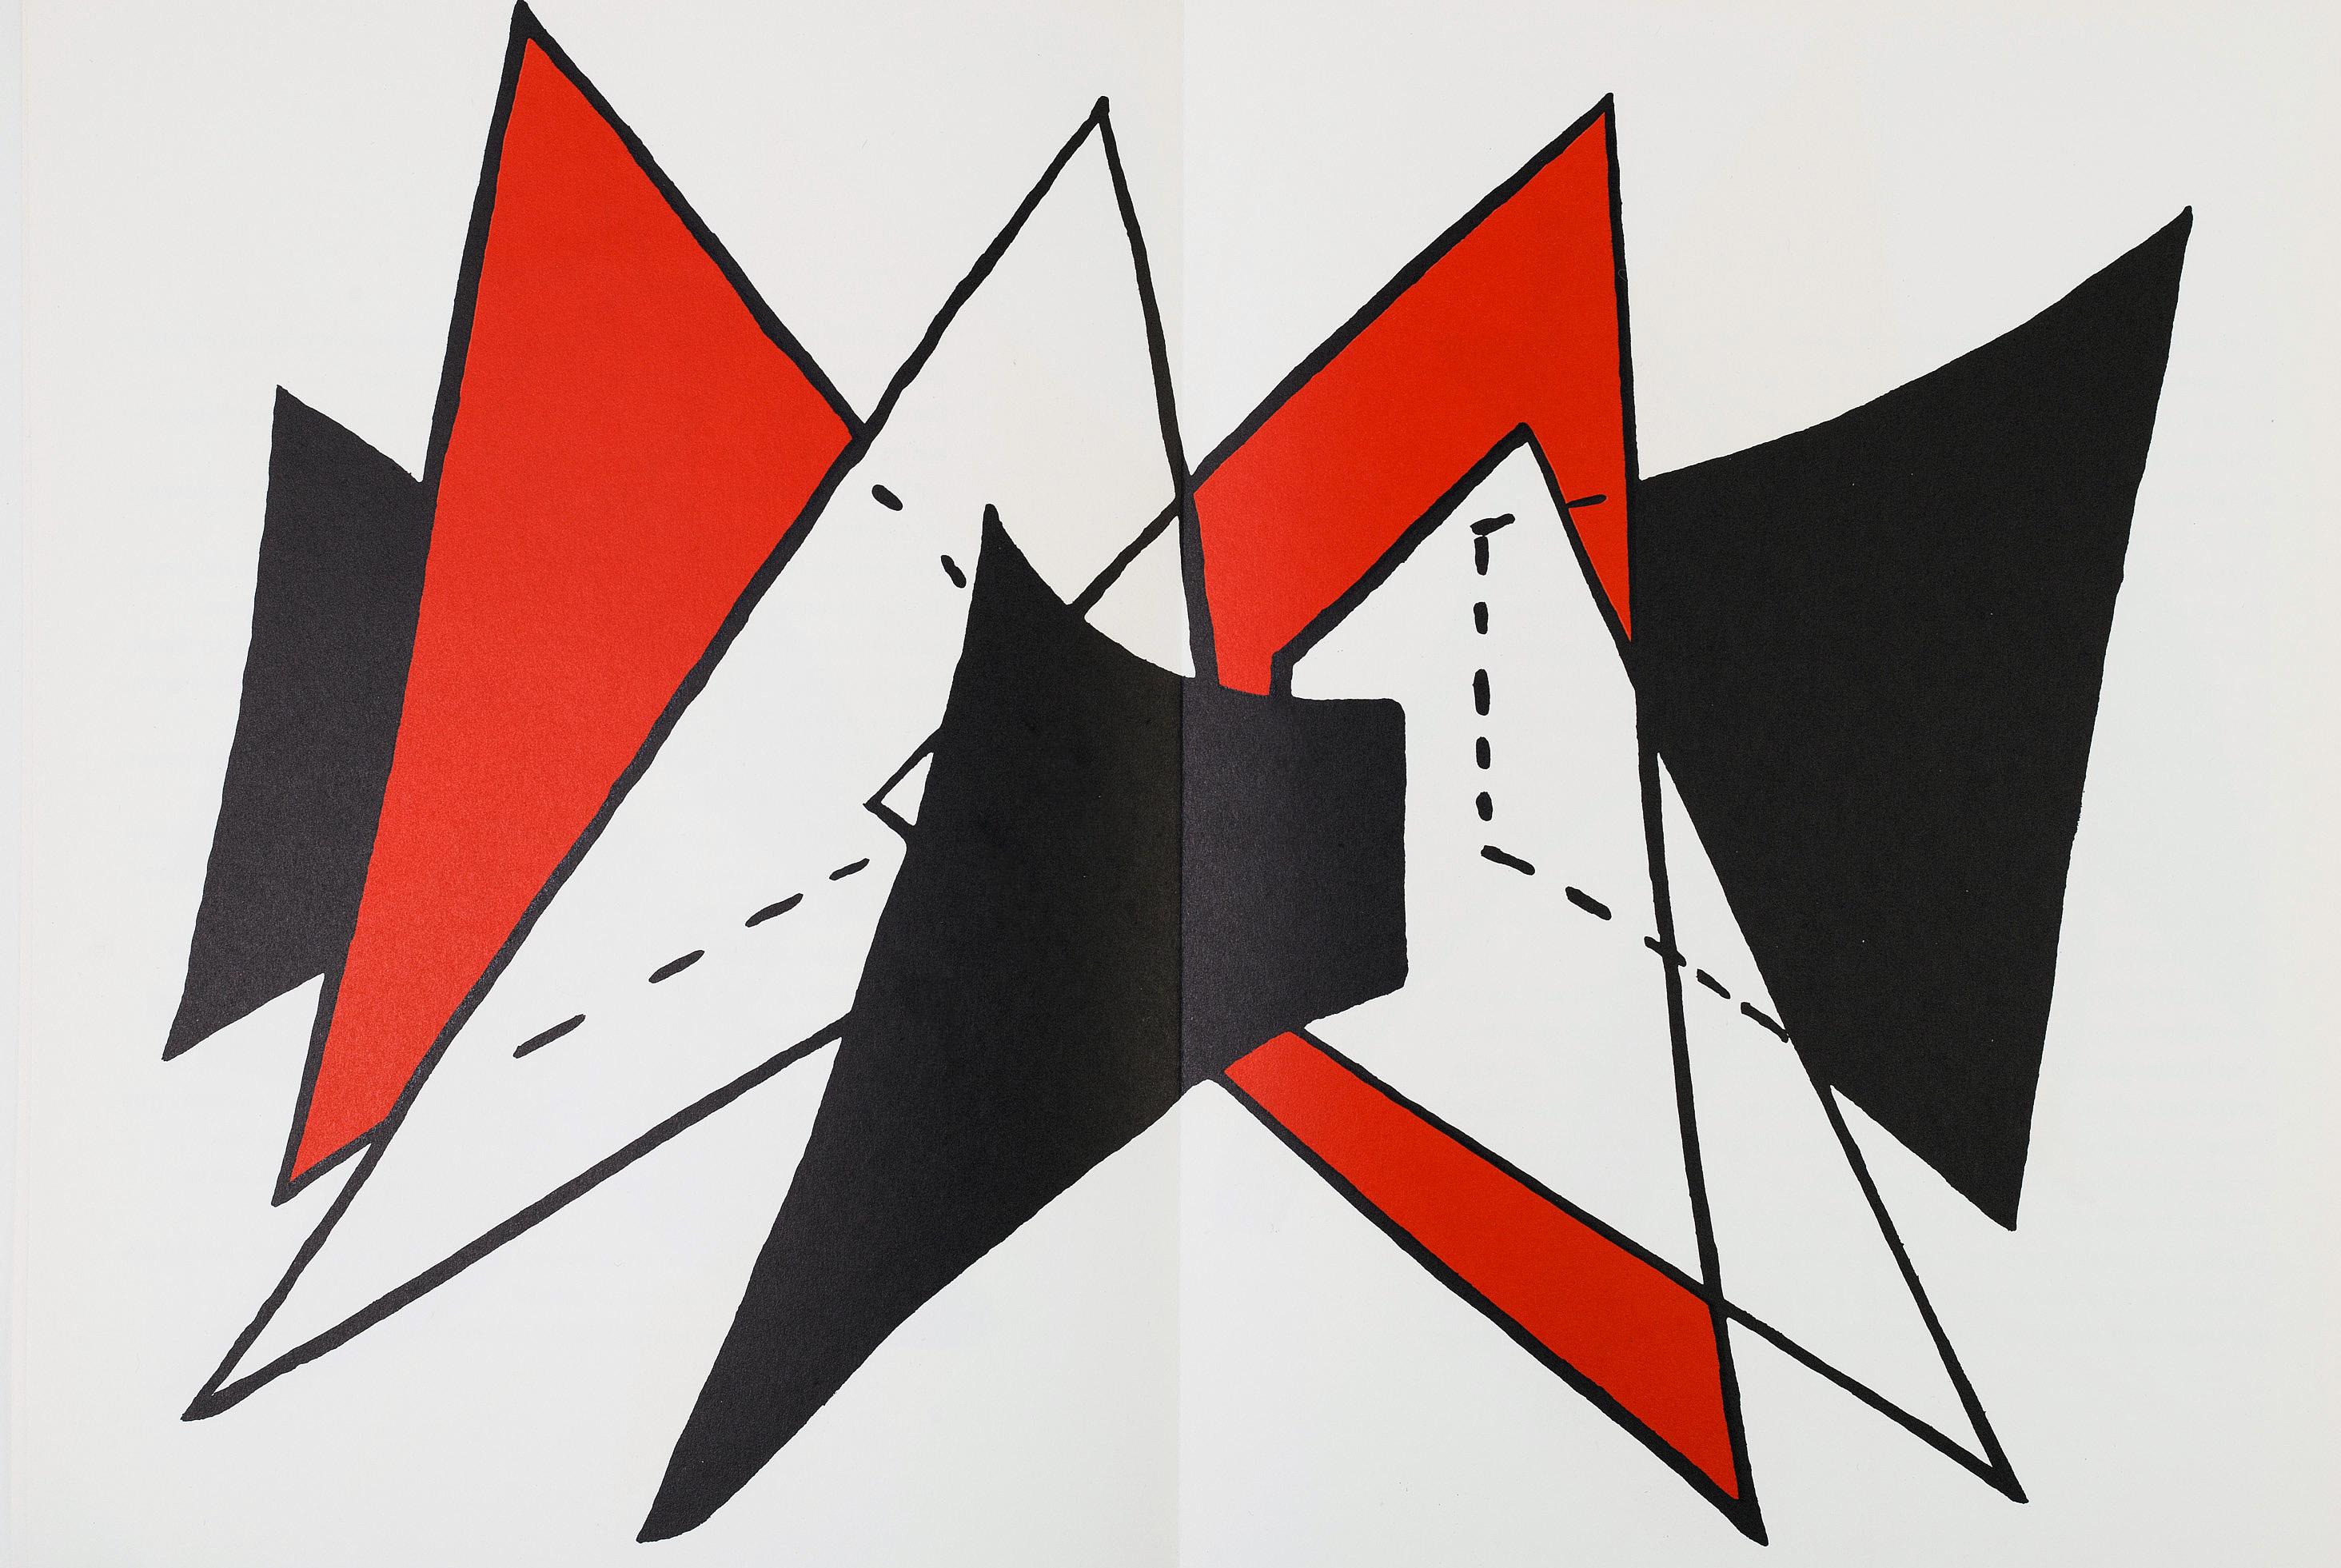 Vintage 1960s Alexander Calder Lithograph.  
Published by: Galerie Maeght, Paris, 1963. 
Portfolio: Derrière le Miroir.

Medium: Lithograph in colors. 
15 x 22 inches.
Center fold-line as issued; very good overall condition for its age.
Unsigned